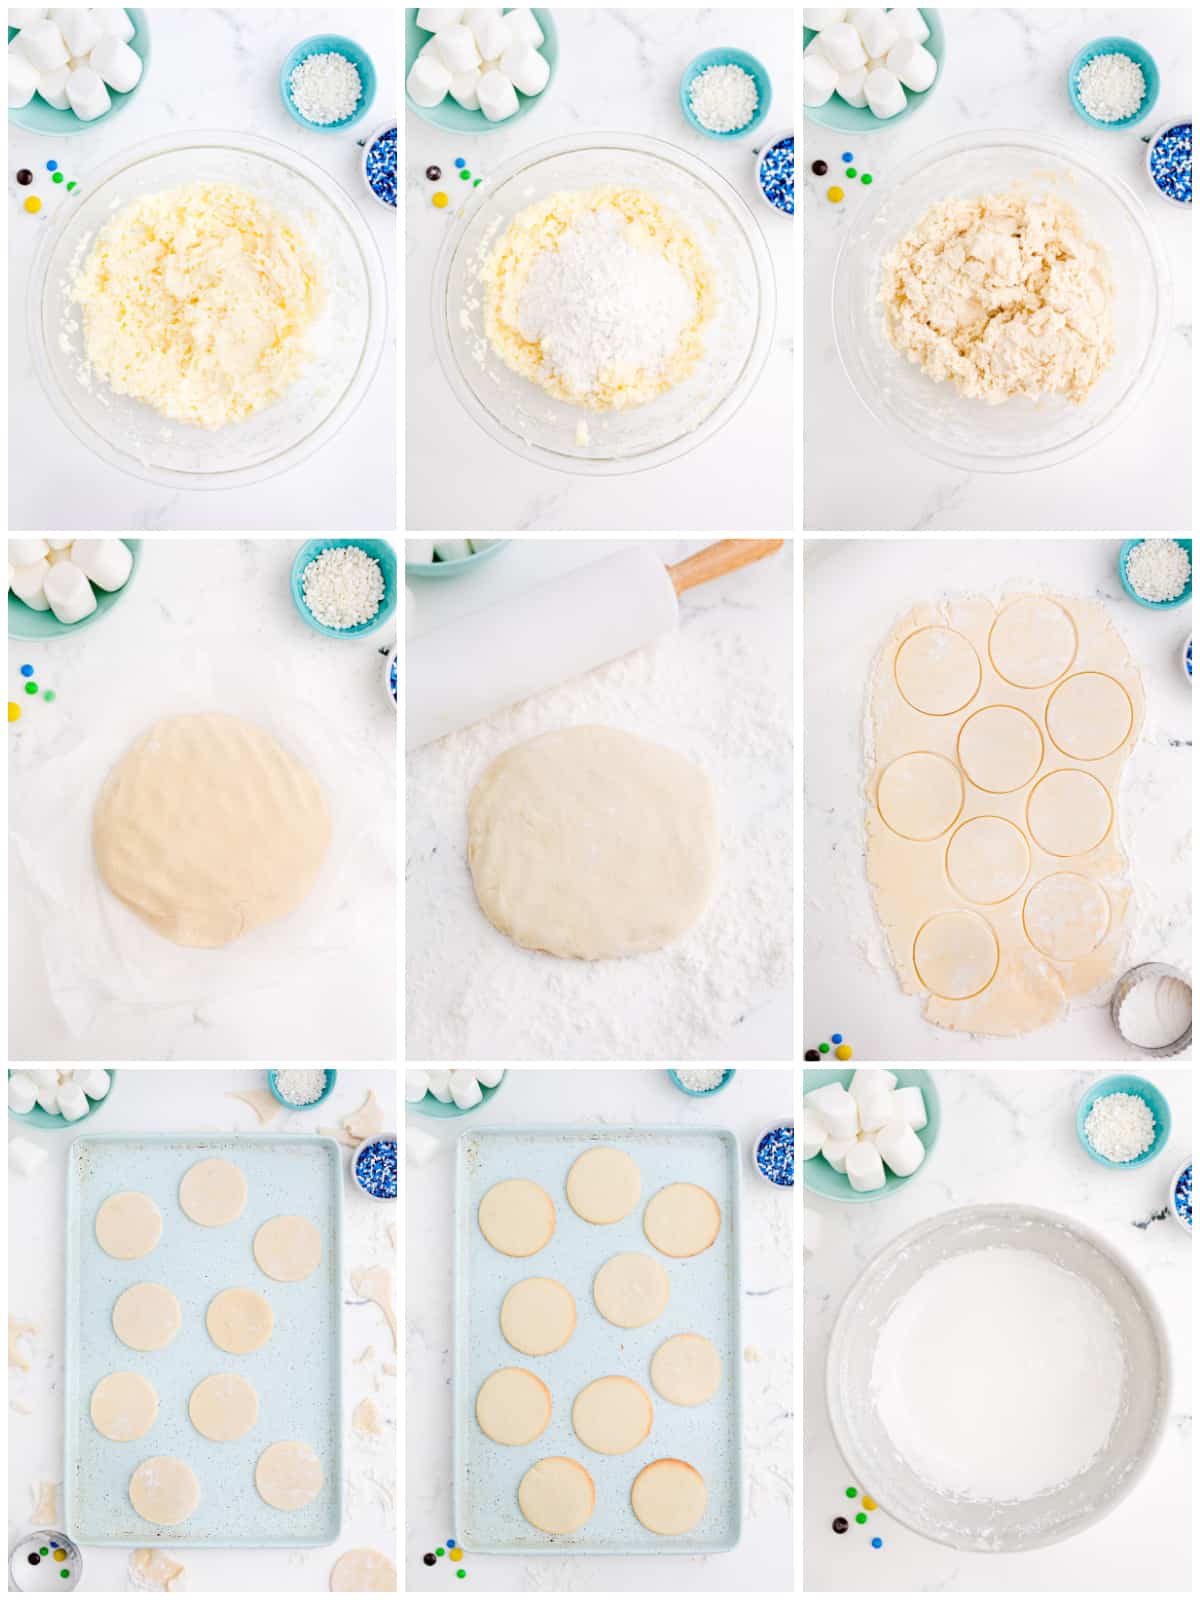 Step by step photos on how to make Melted Snowman Cookies.